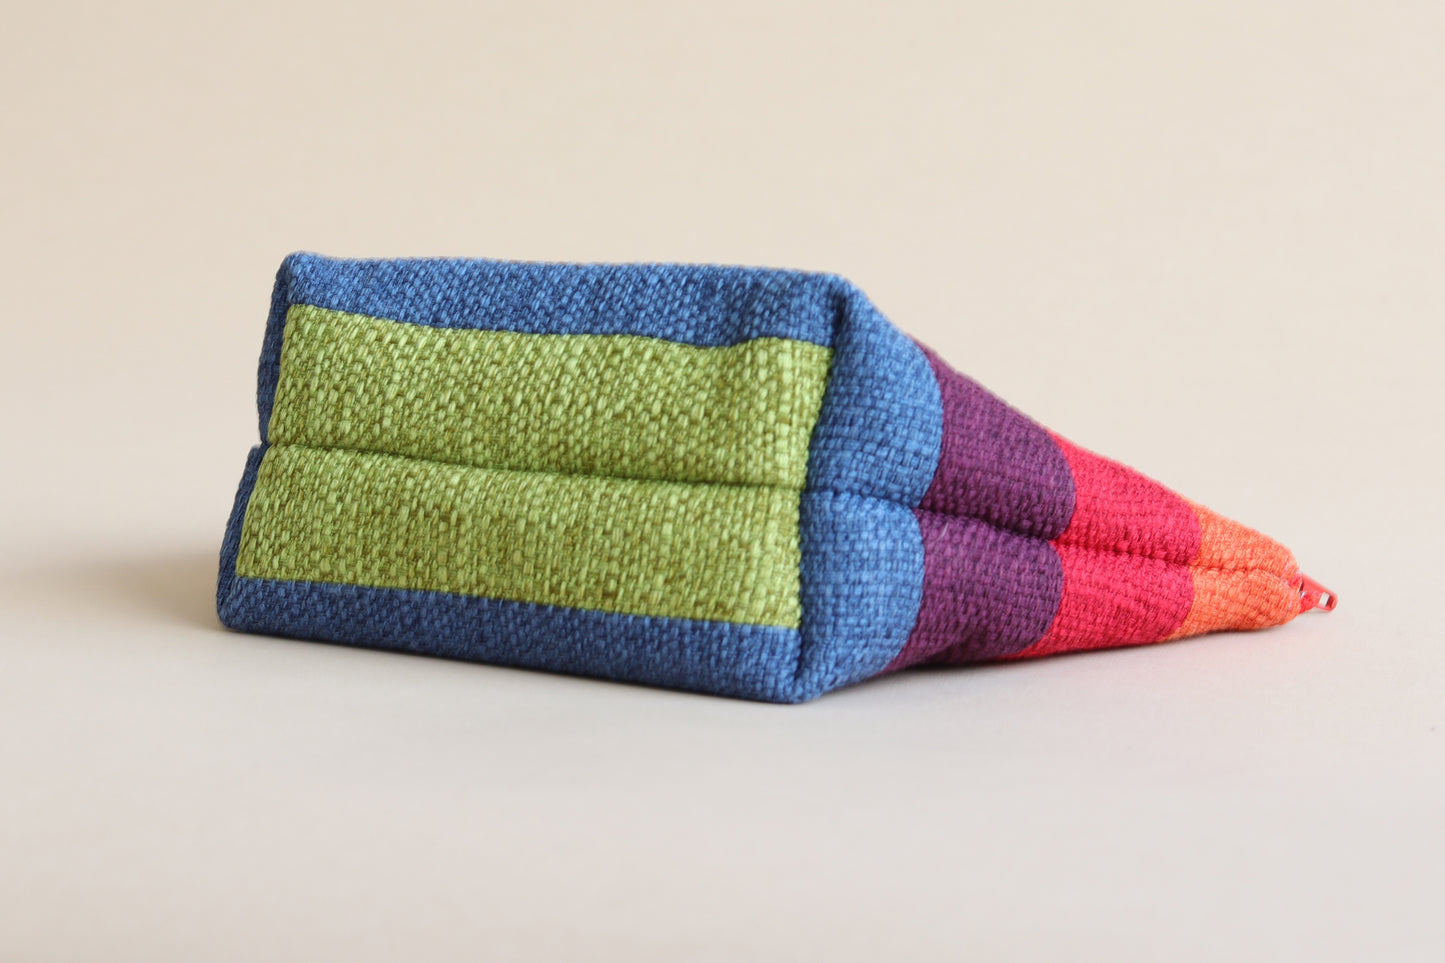 Upcycled Rainbow Fabric Zipper Pouch